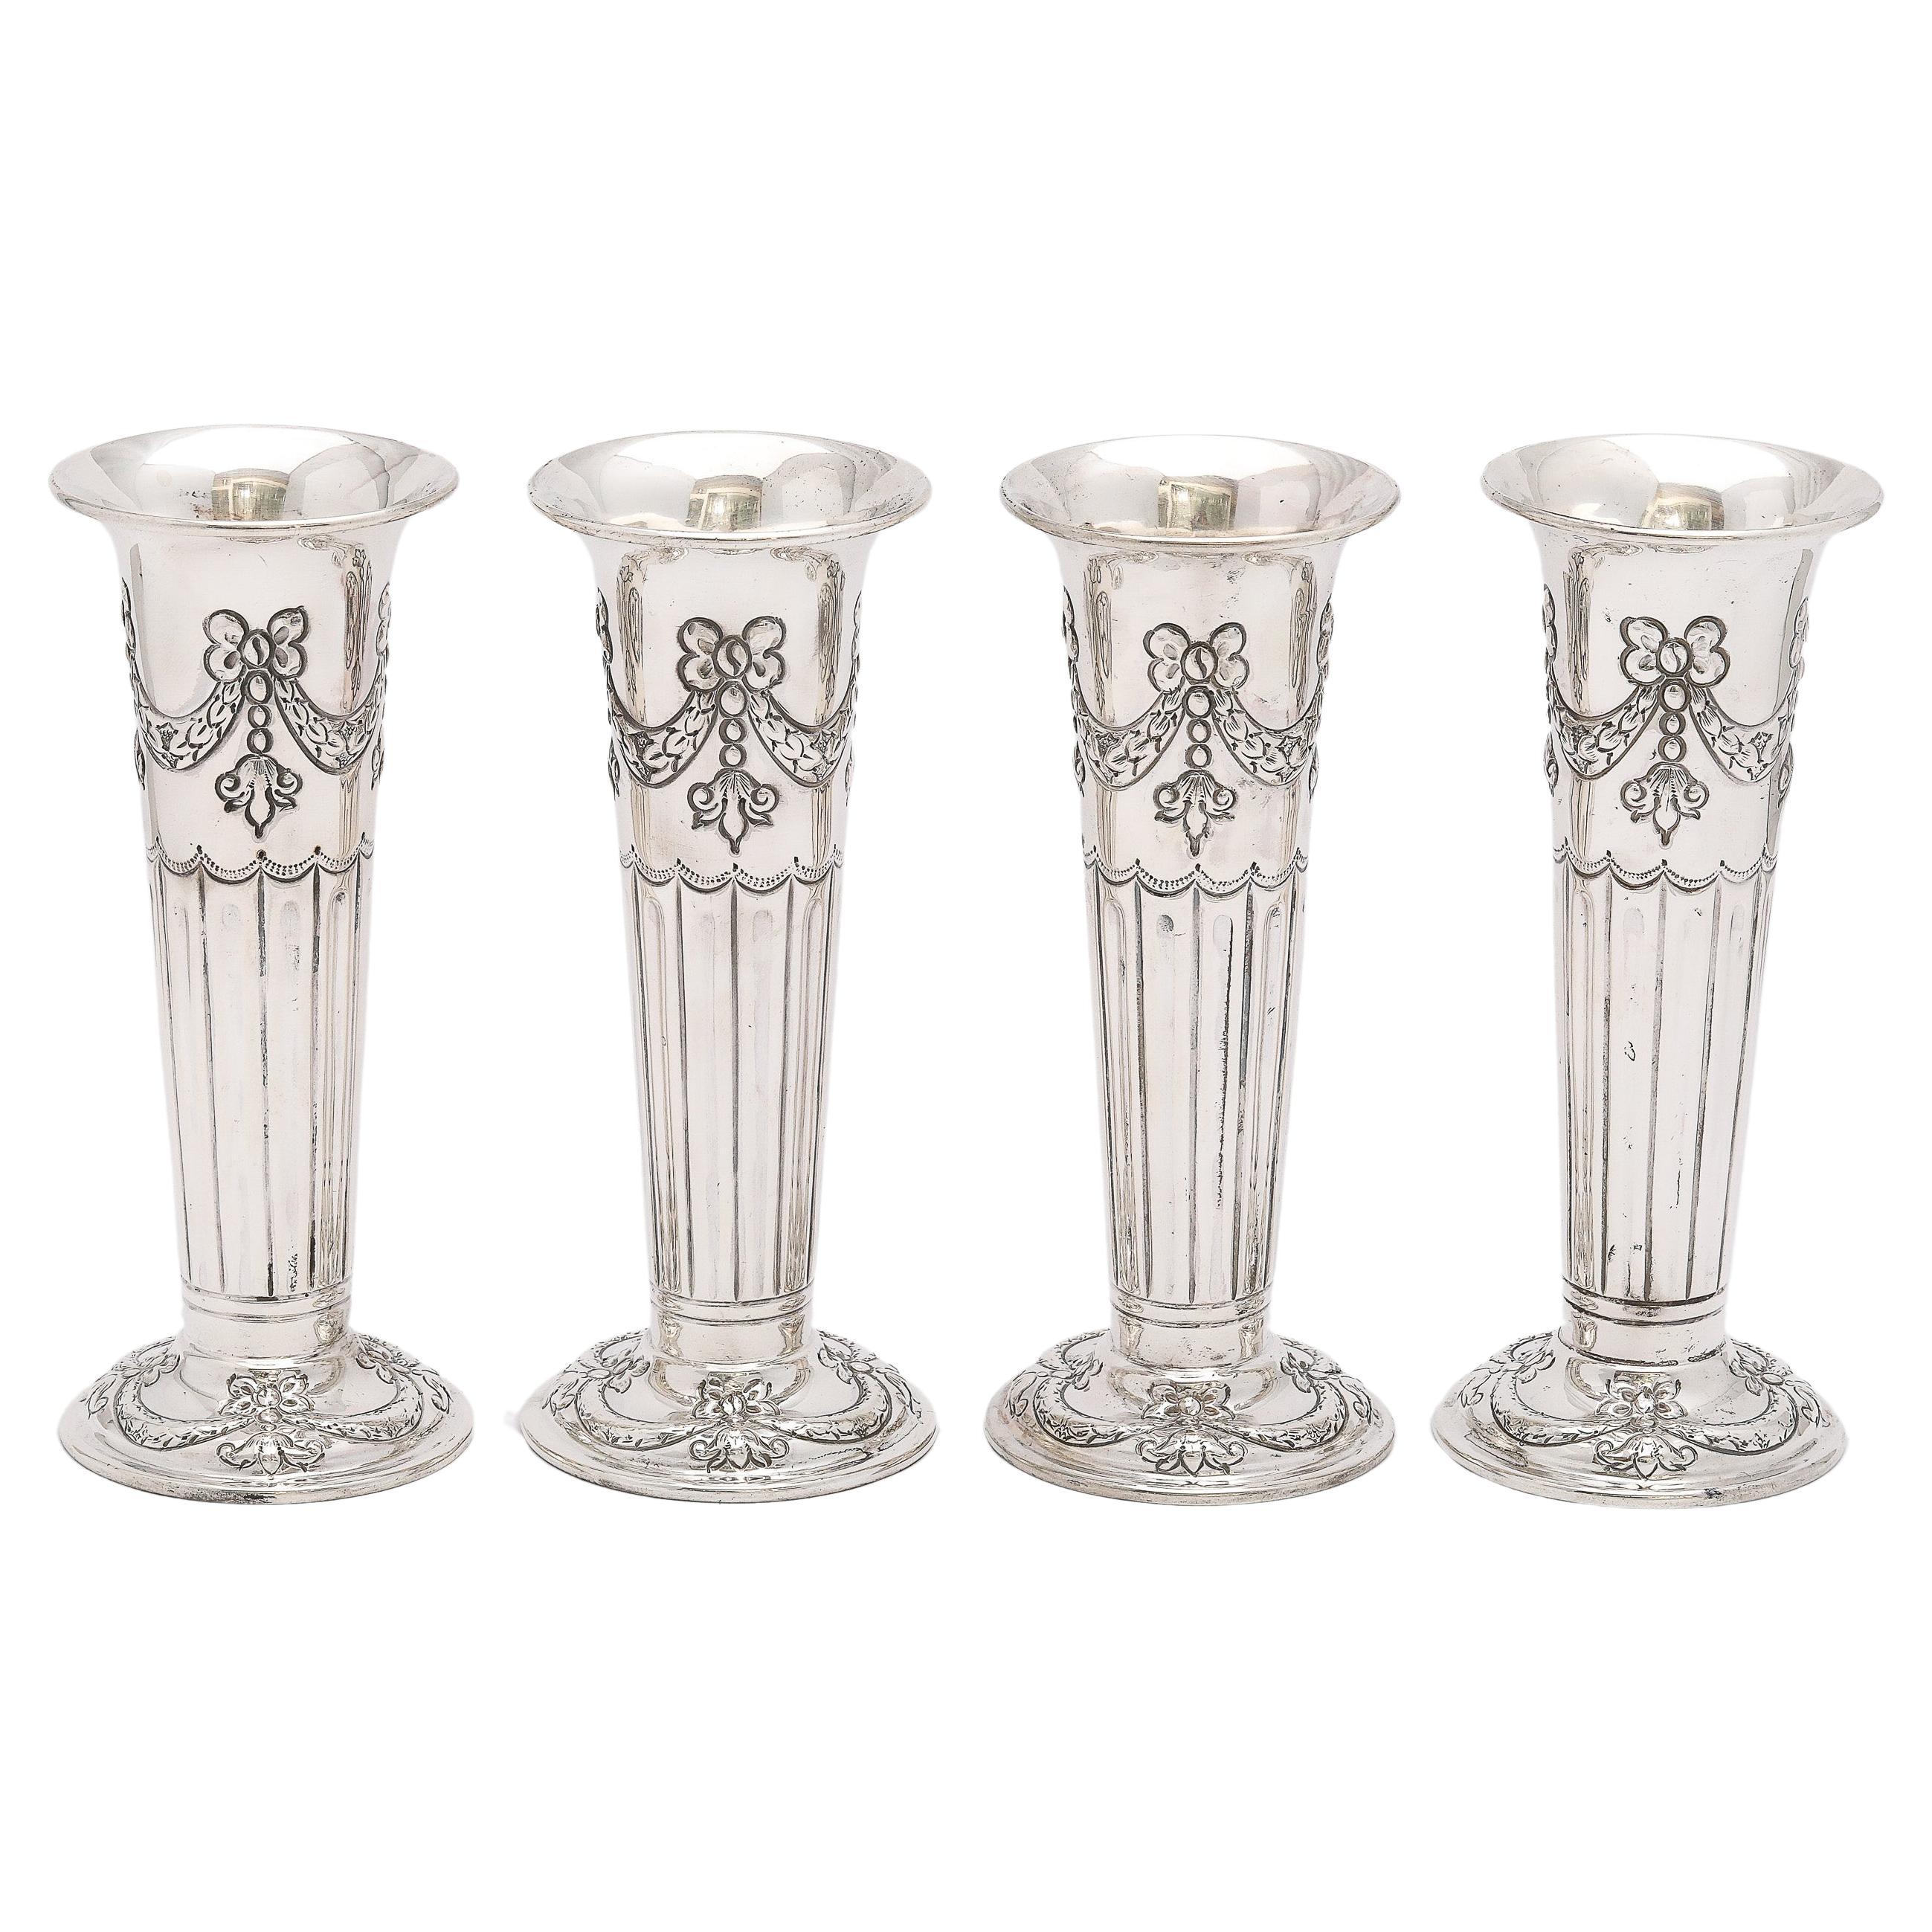 Rare Victorian Period Set of Four Matching Sterling Silver Bud Vases By Atkin For Sale